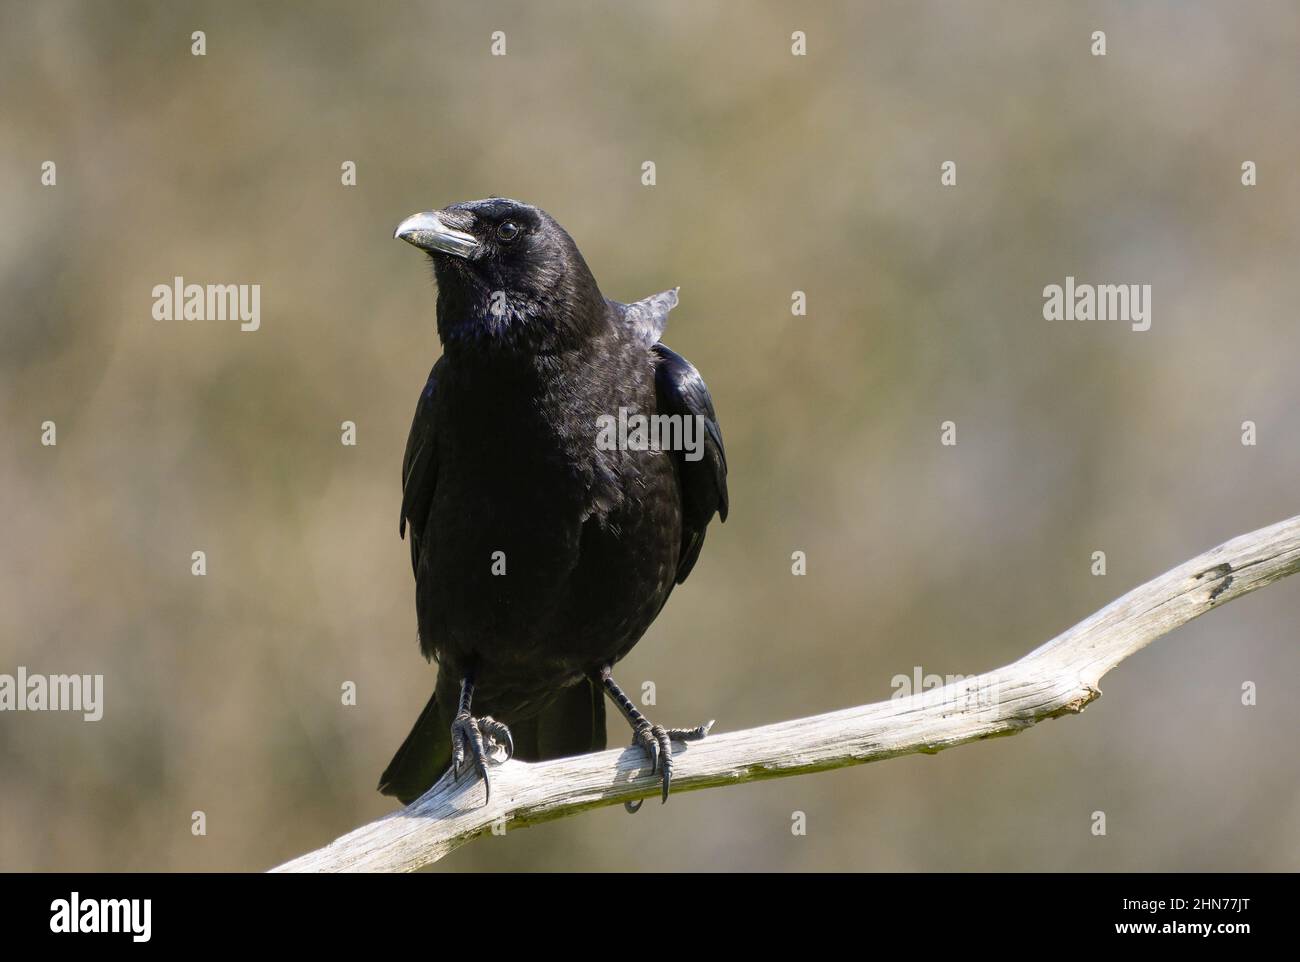 Close-up of a Carrion crow perched on a branch Stock Photo